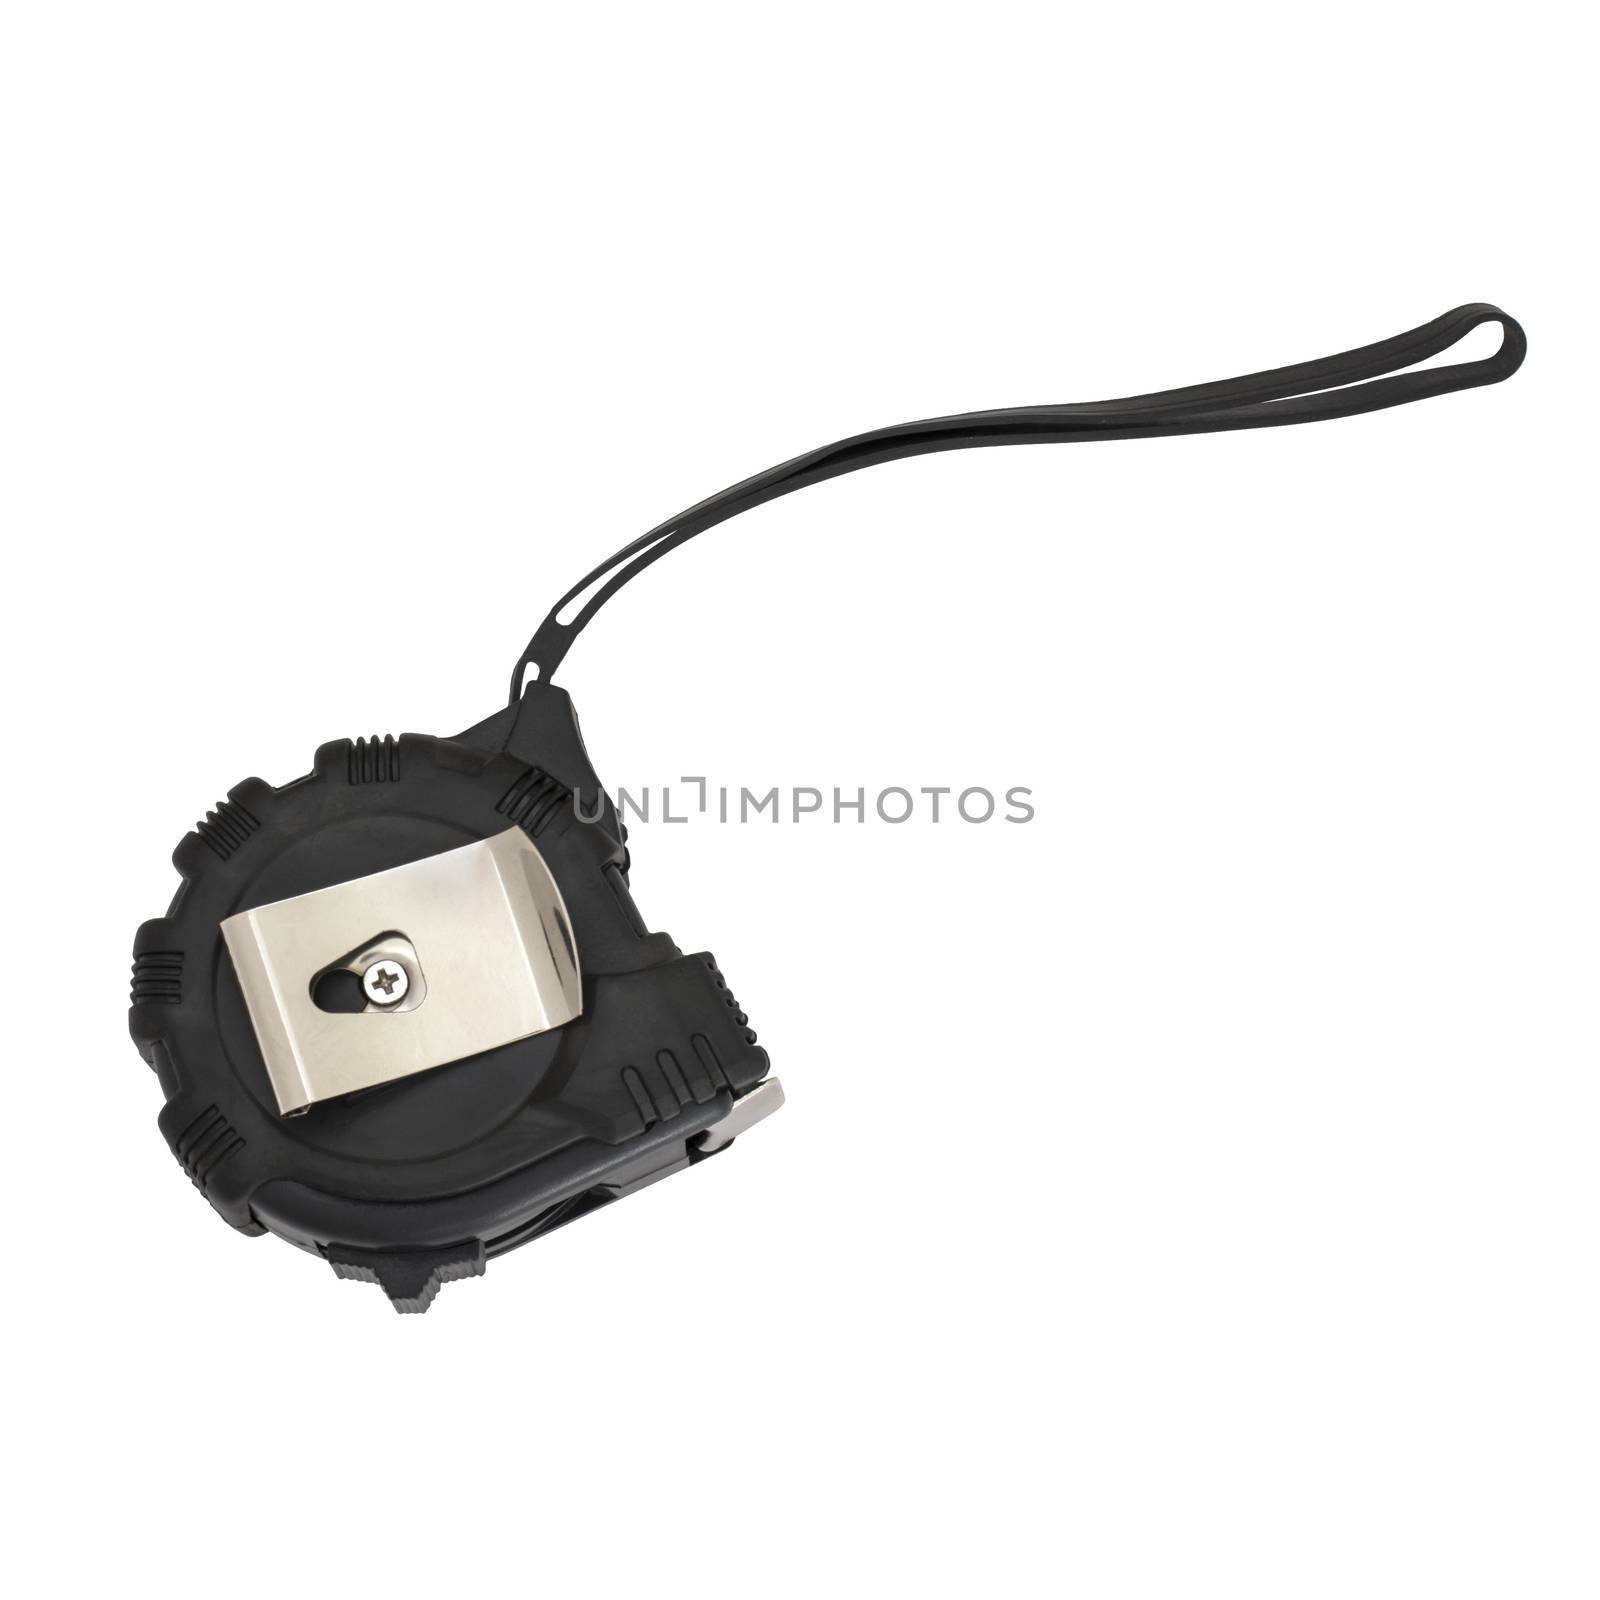 Black tape measure. Isolated on white background